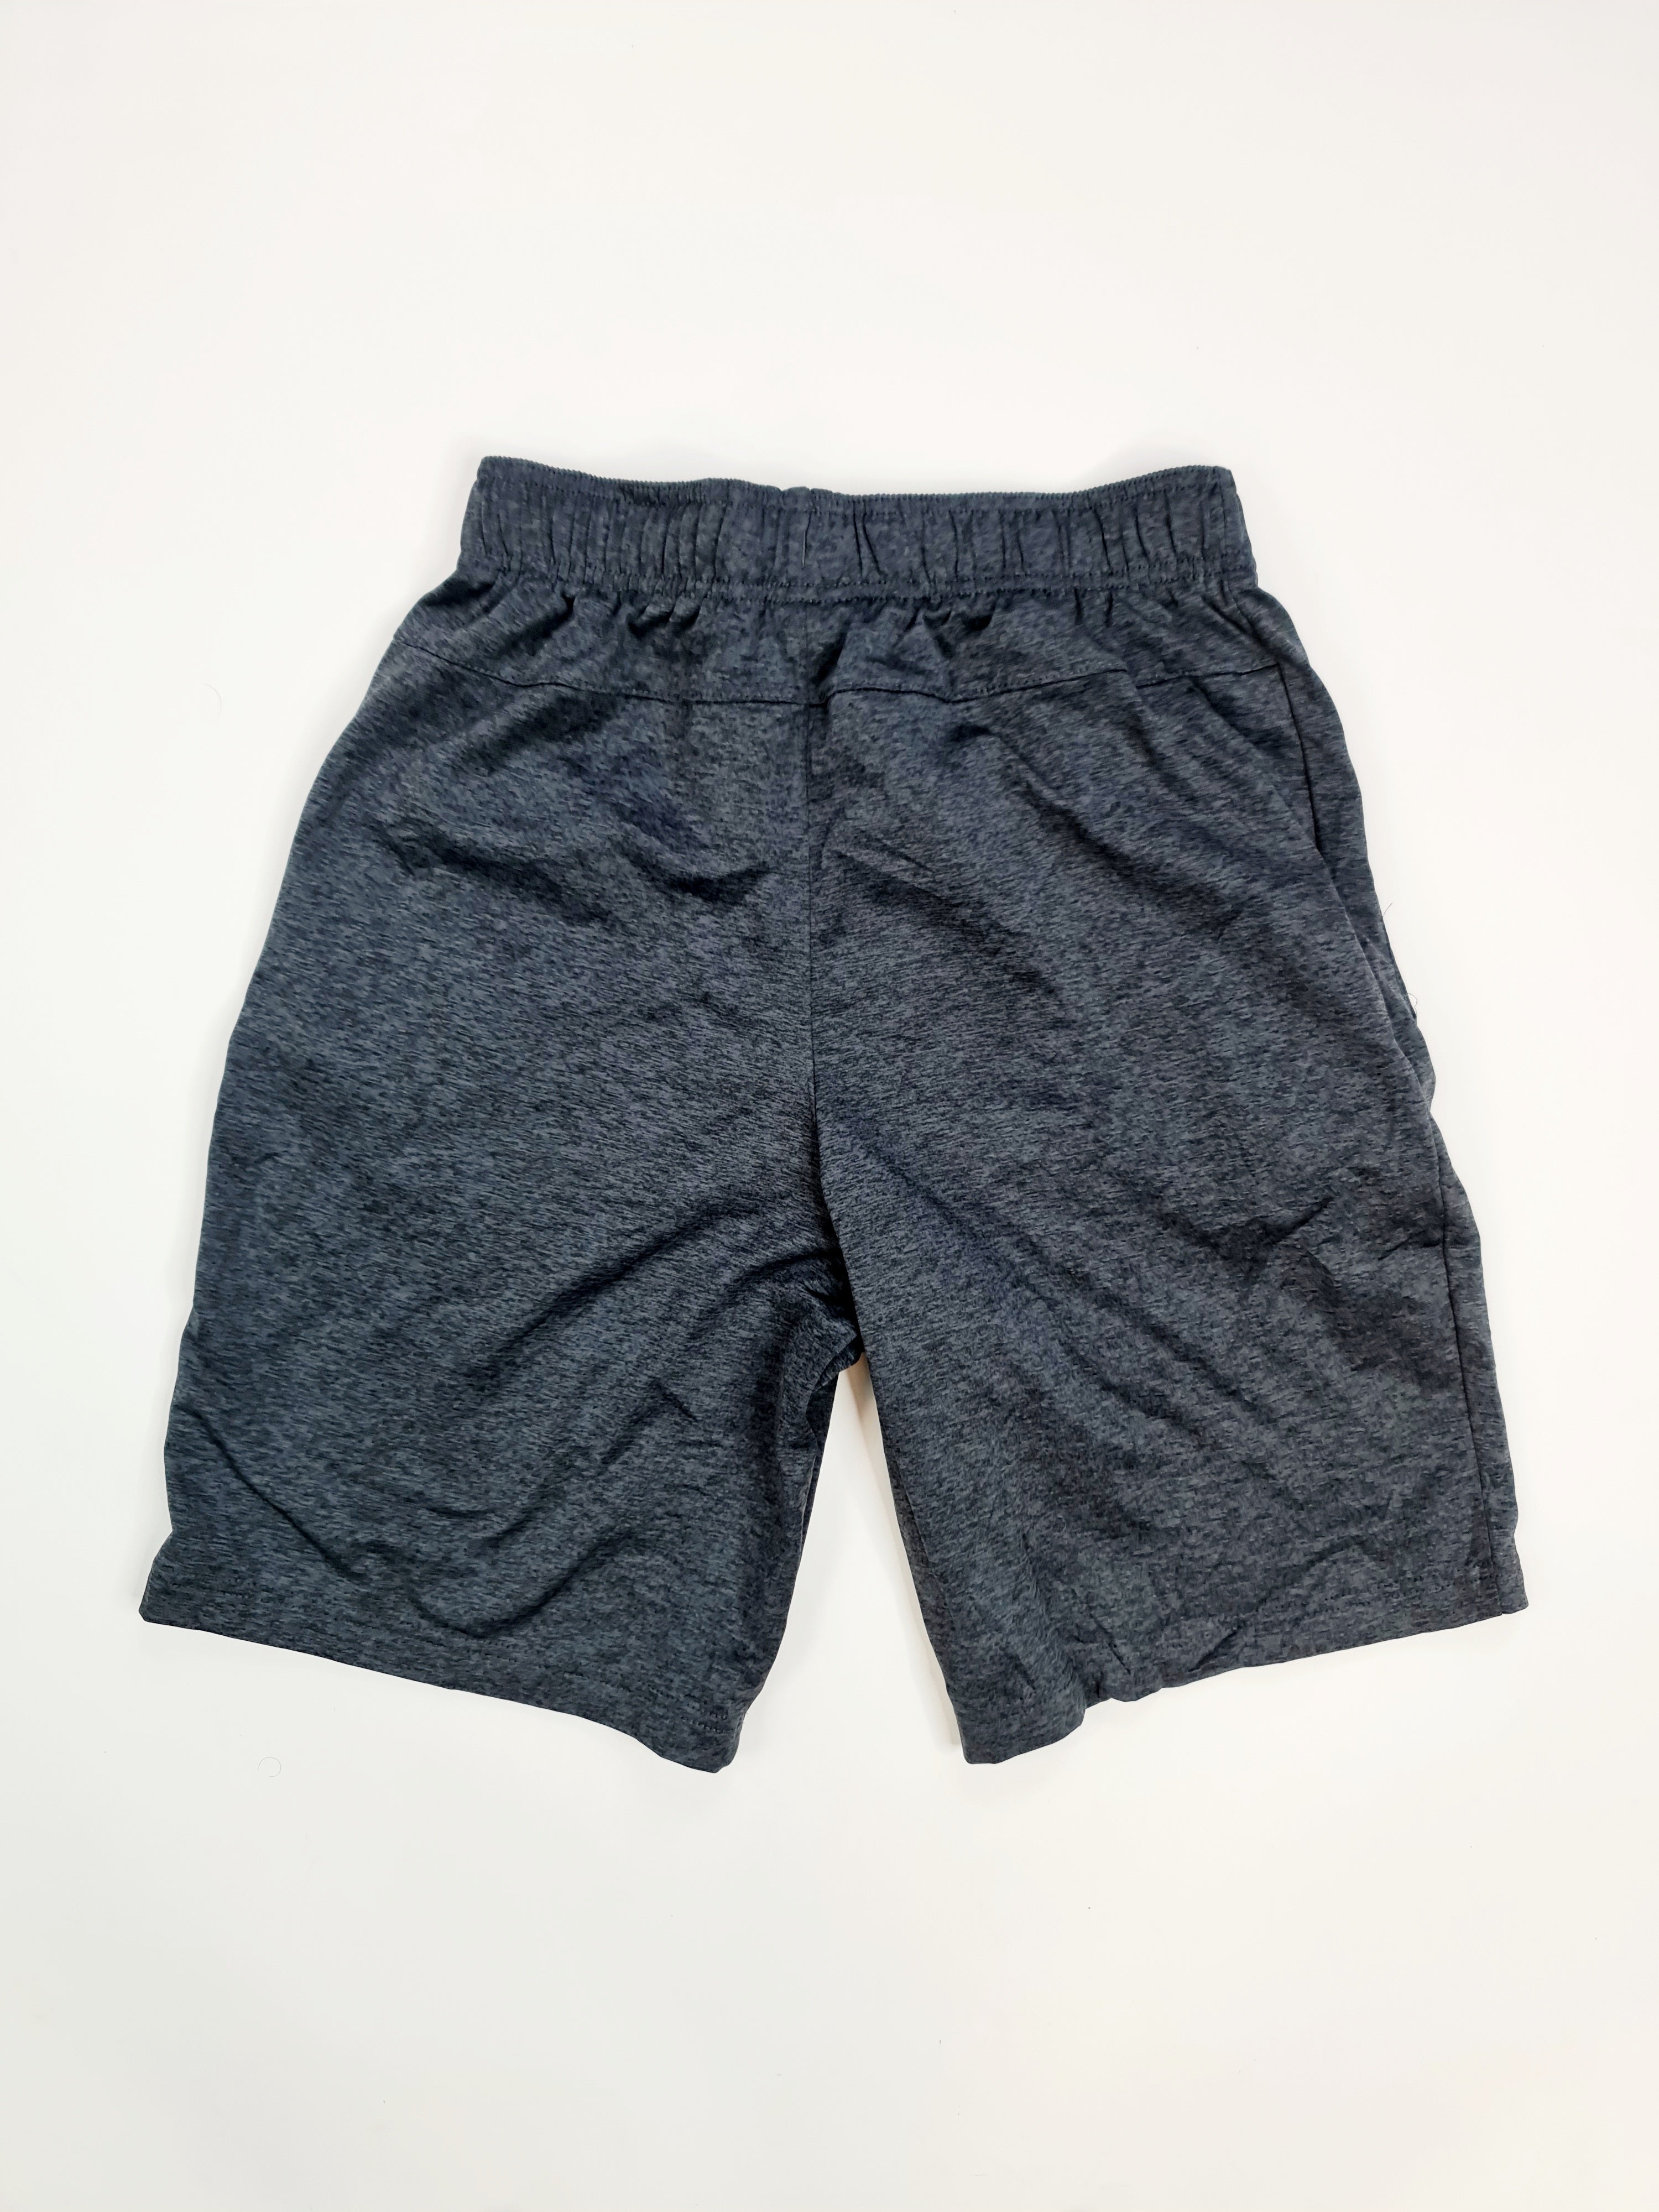 Short Deportivo, Athletic Works - (Talla: S/P) Gris